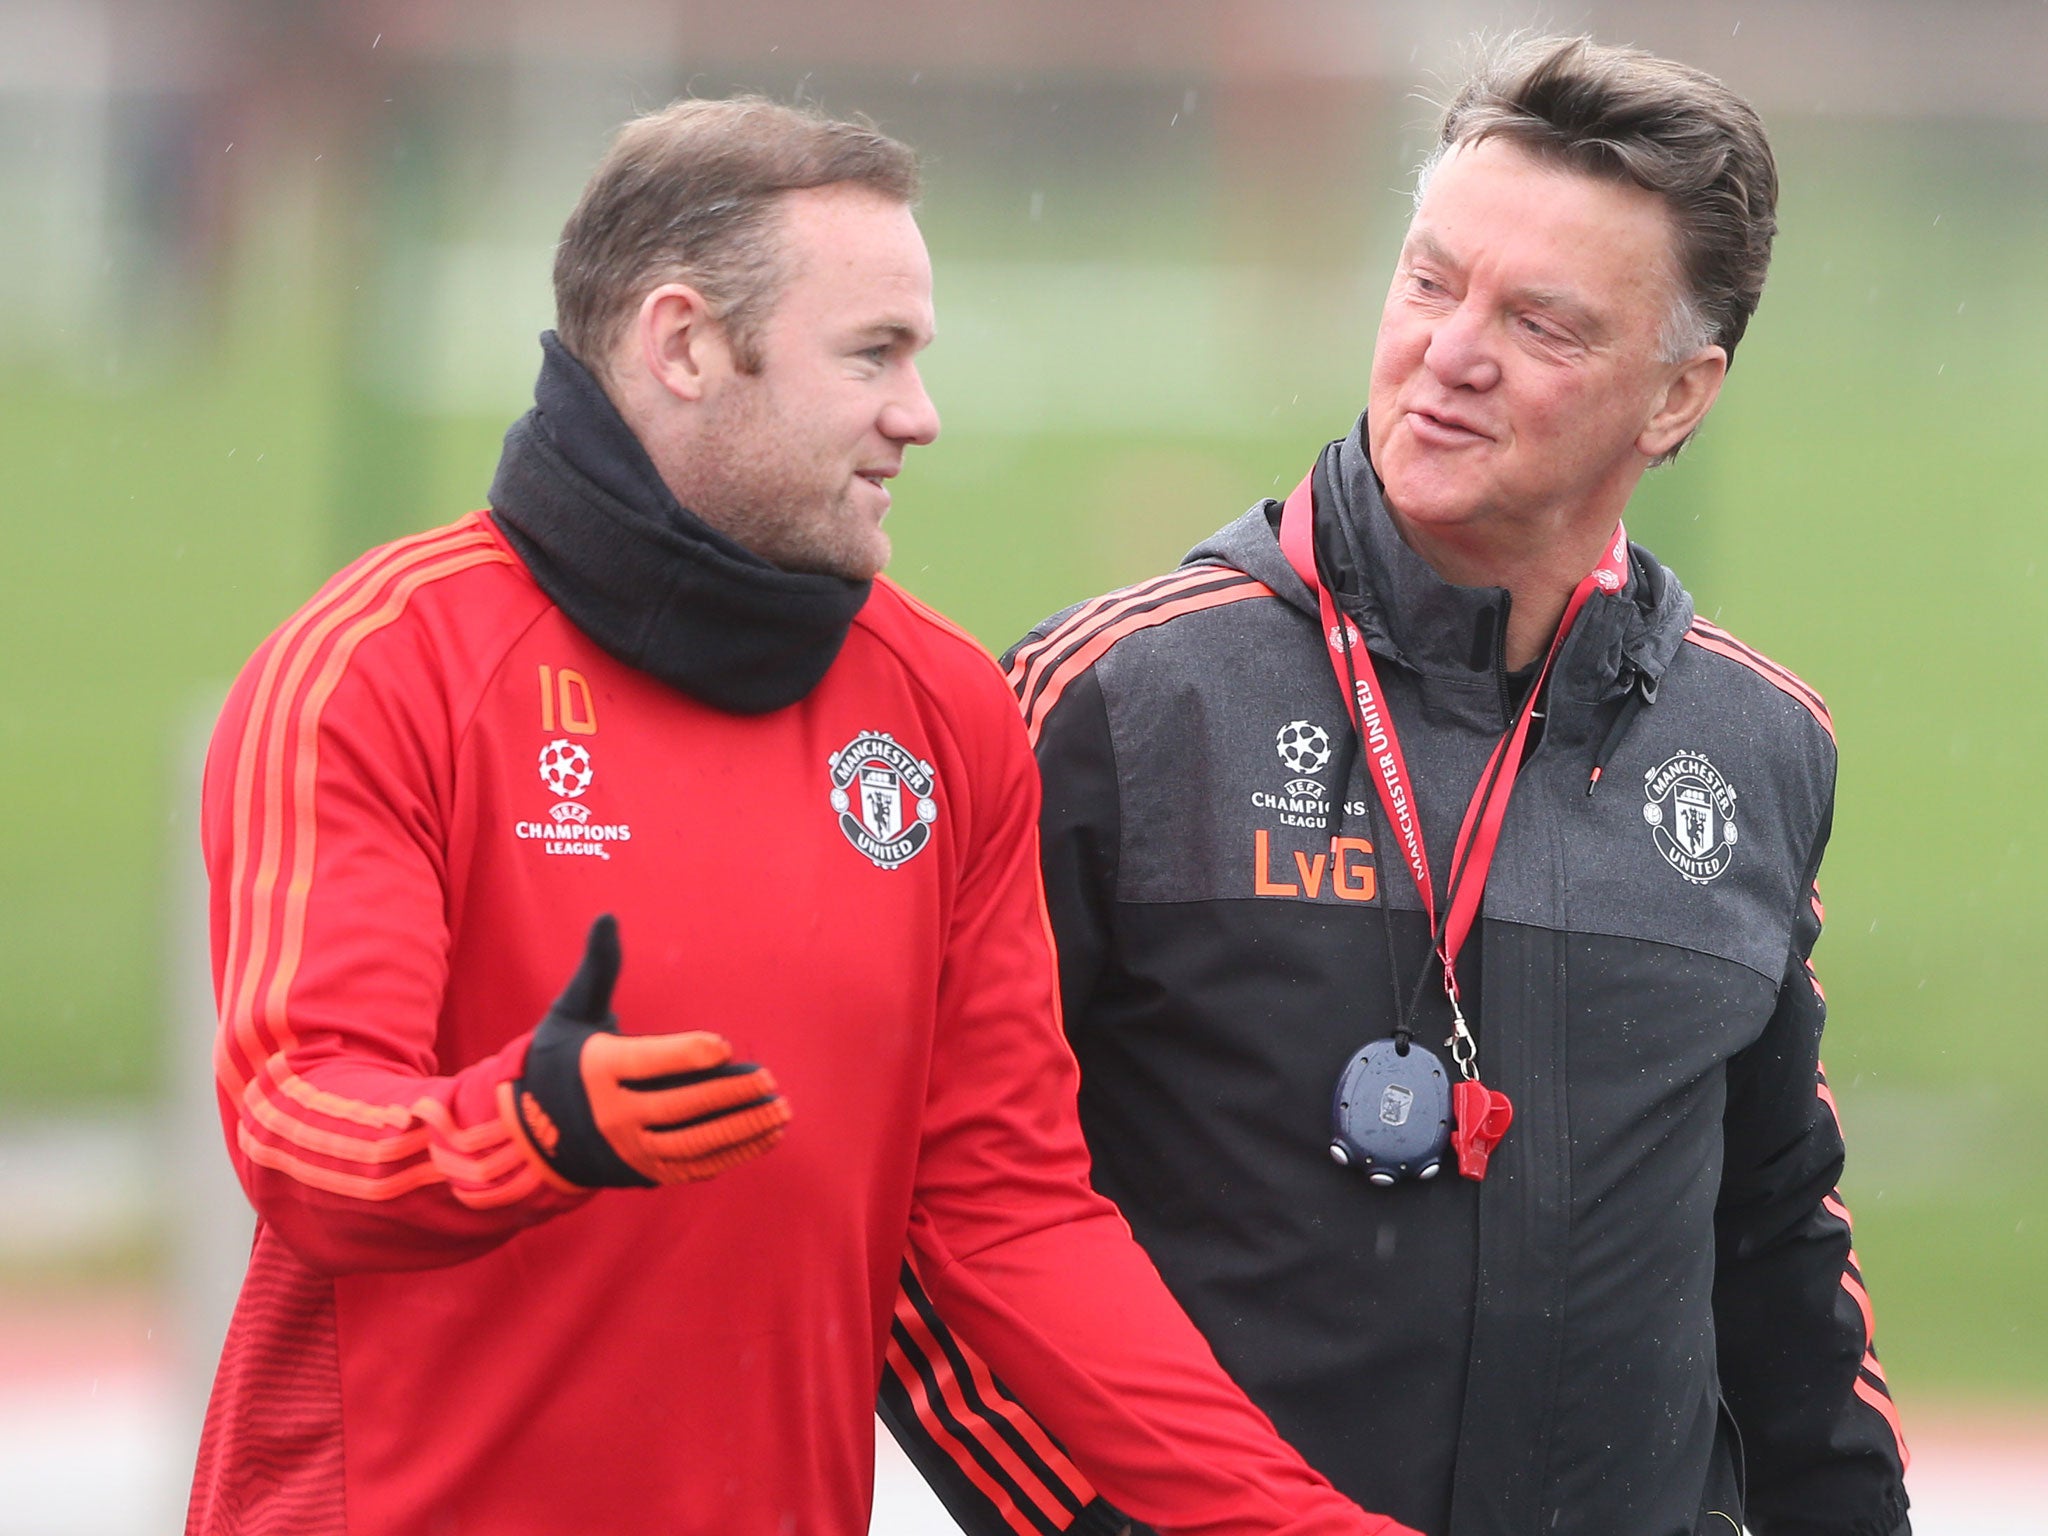 Wayne Rooney speaks with Louis van Gaal during a Manchester United training session